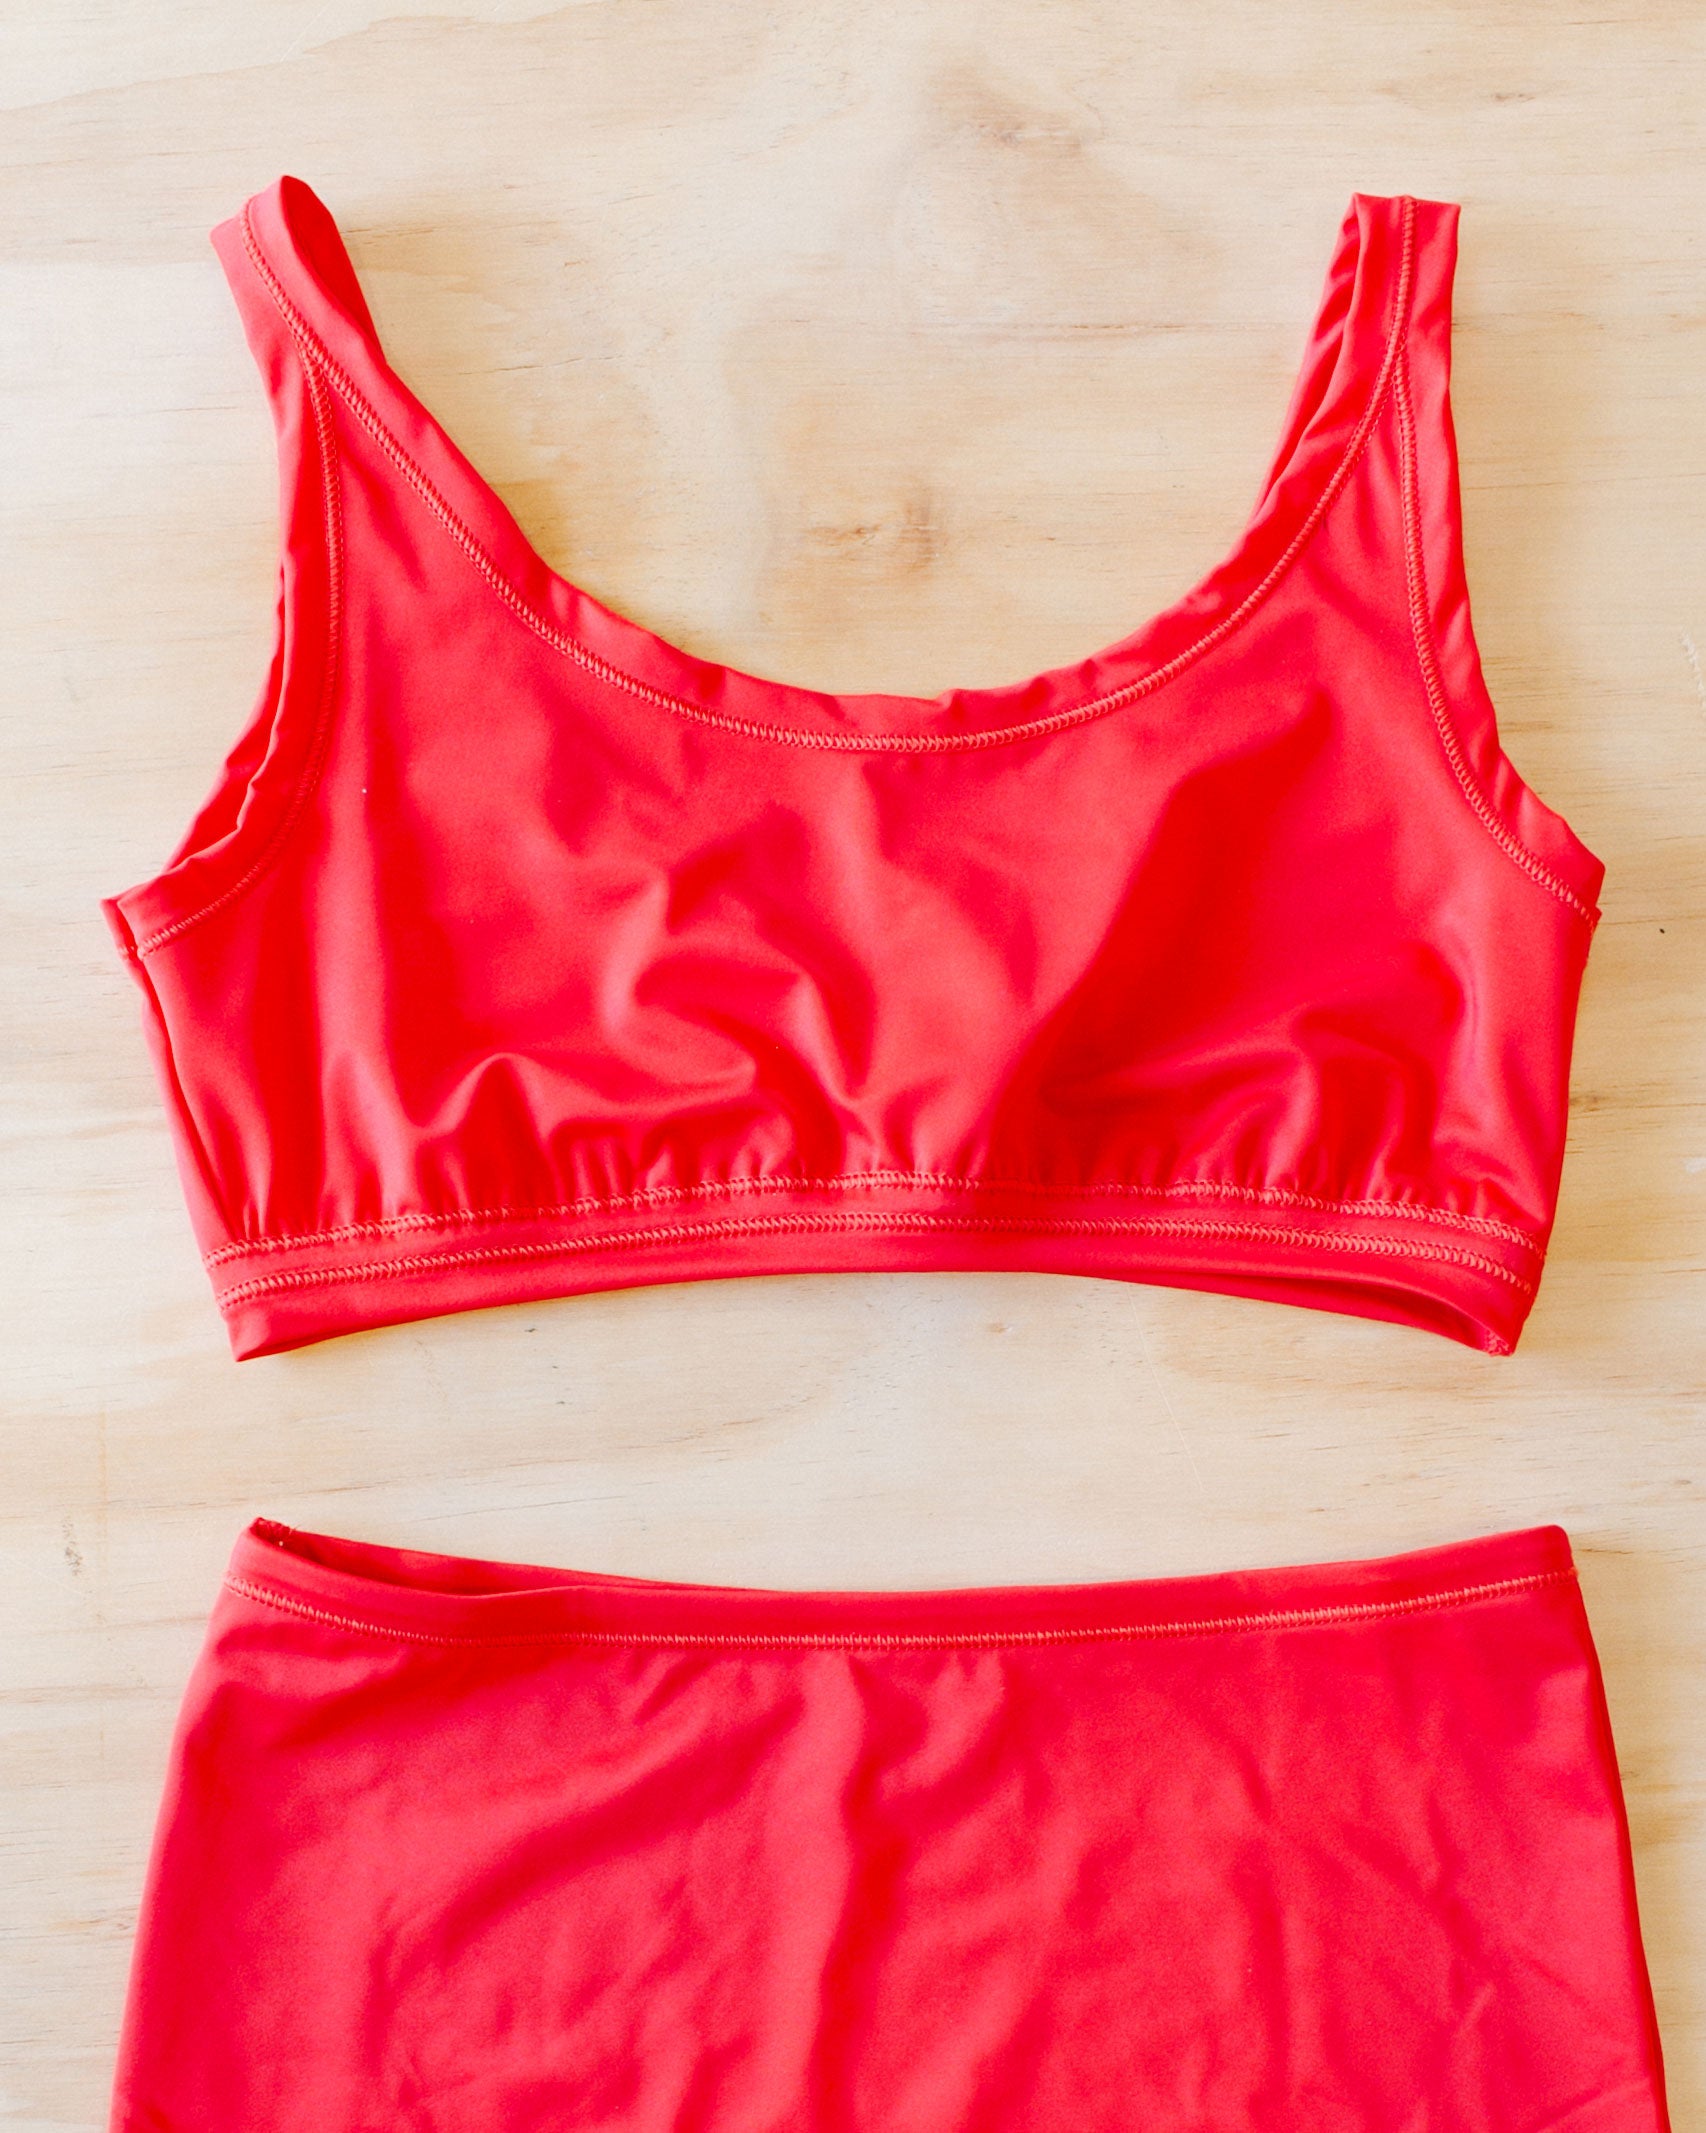 The Higher - Red Econyl Swimsuit